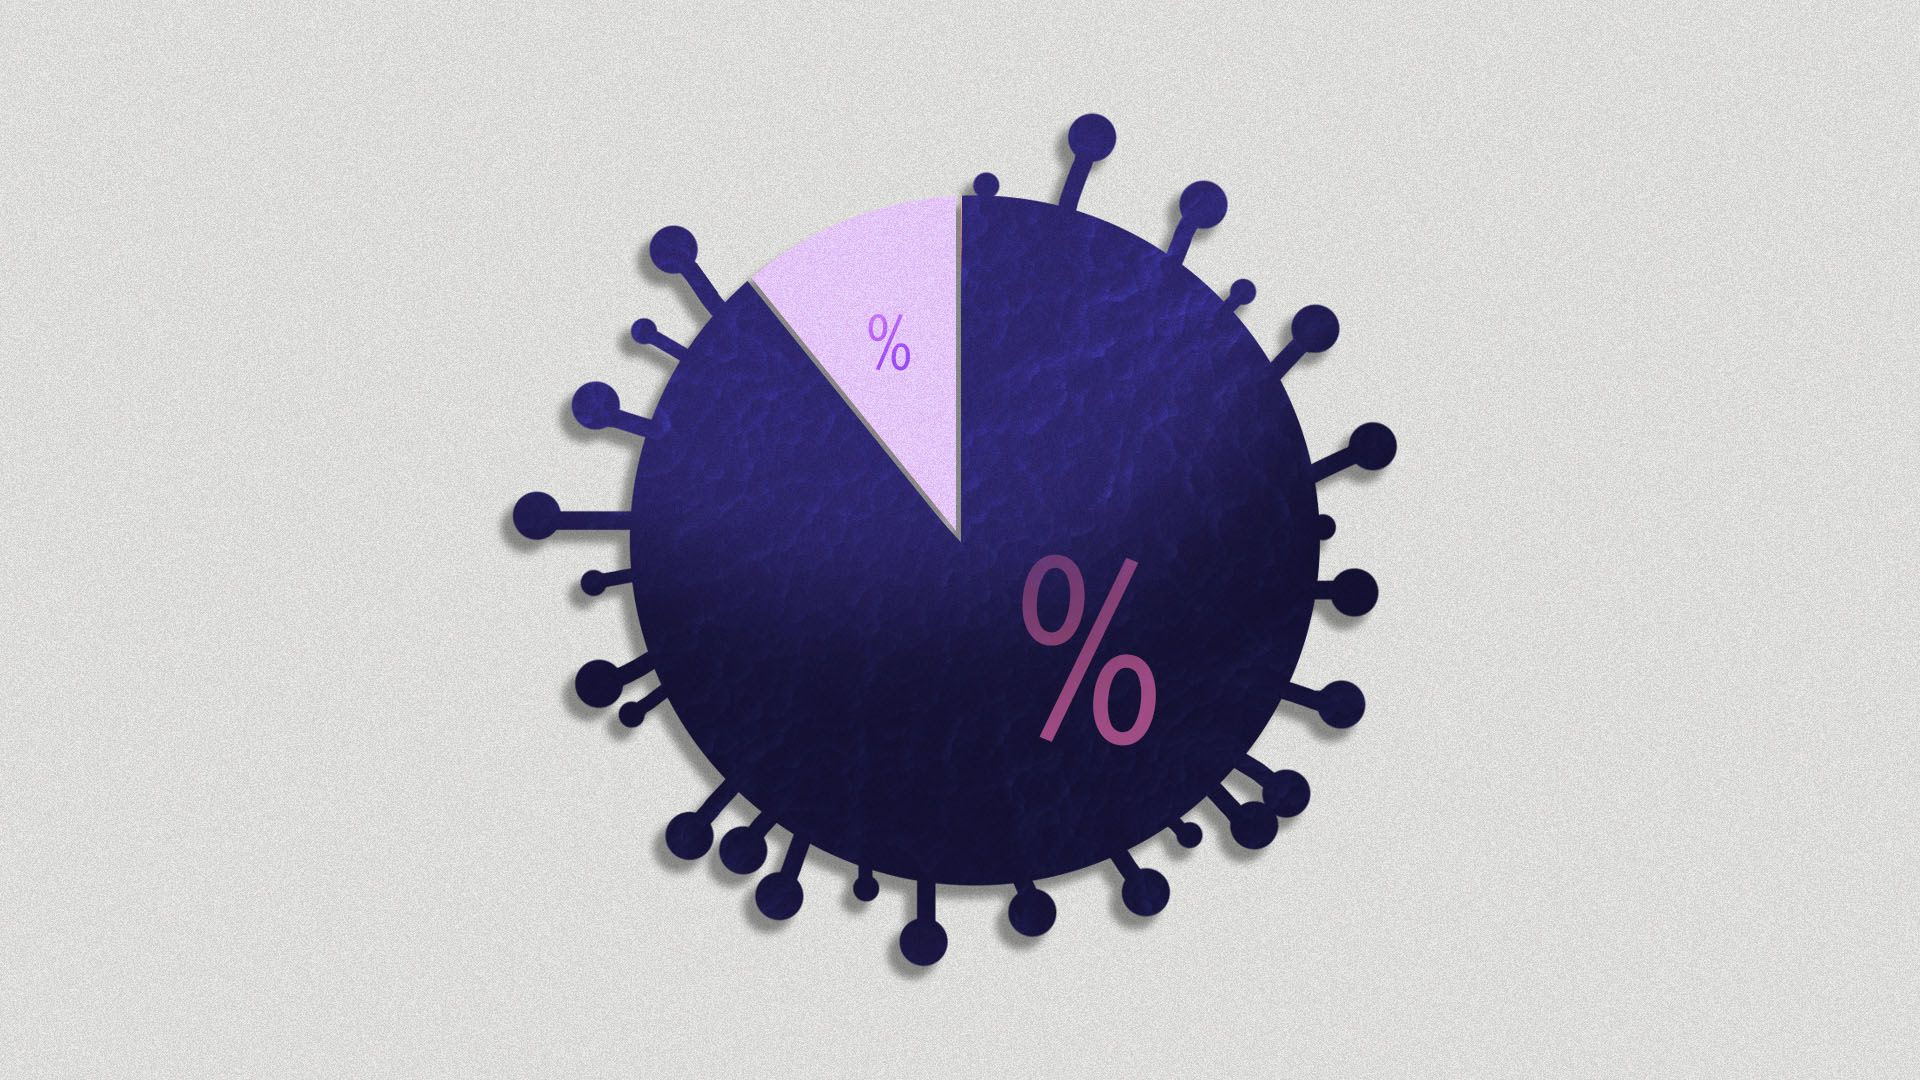 Illustration of a pie chart with two slices, with the bigger slice shaped as a virus